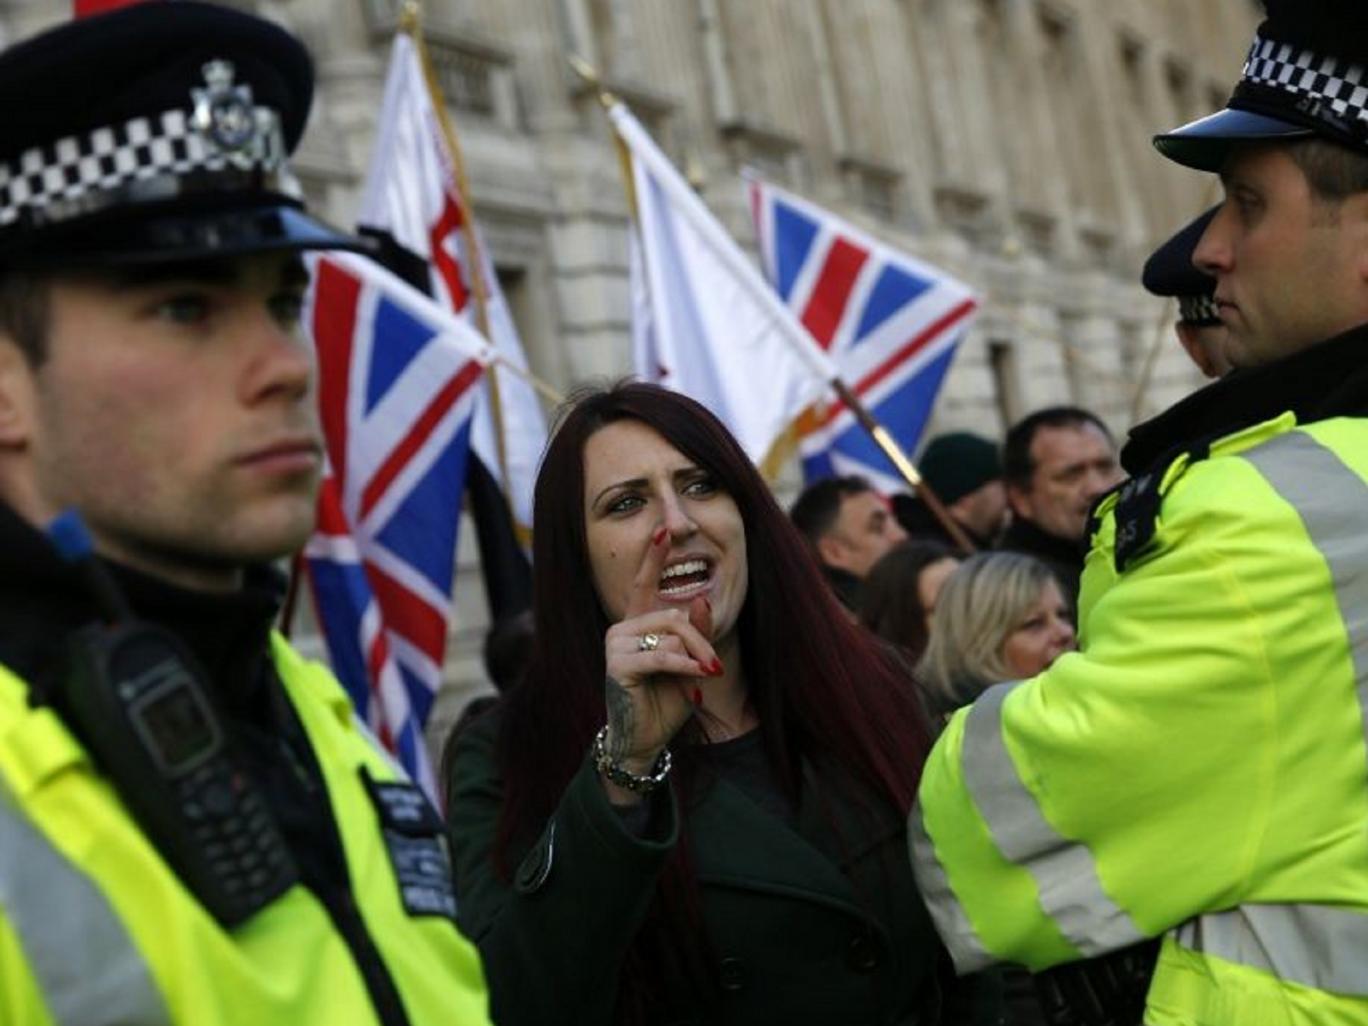 Jayda Fransen, leader of the far-right group Britain First, which has called for a march on 1 April in response to the terror attack in London